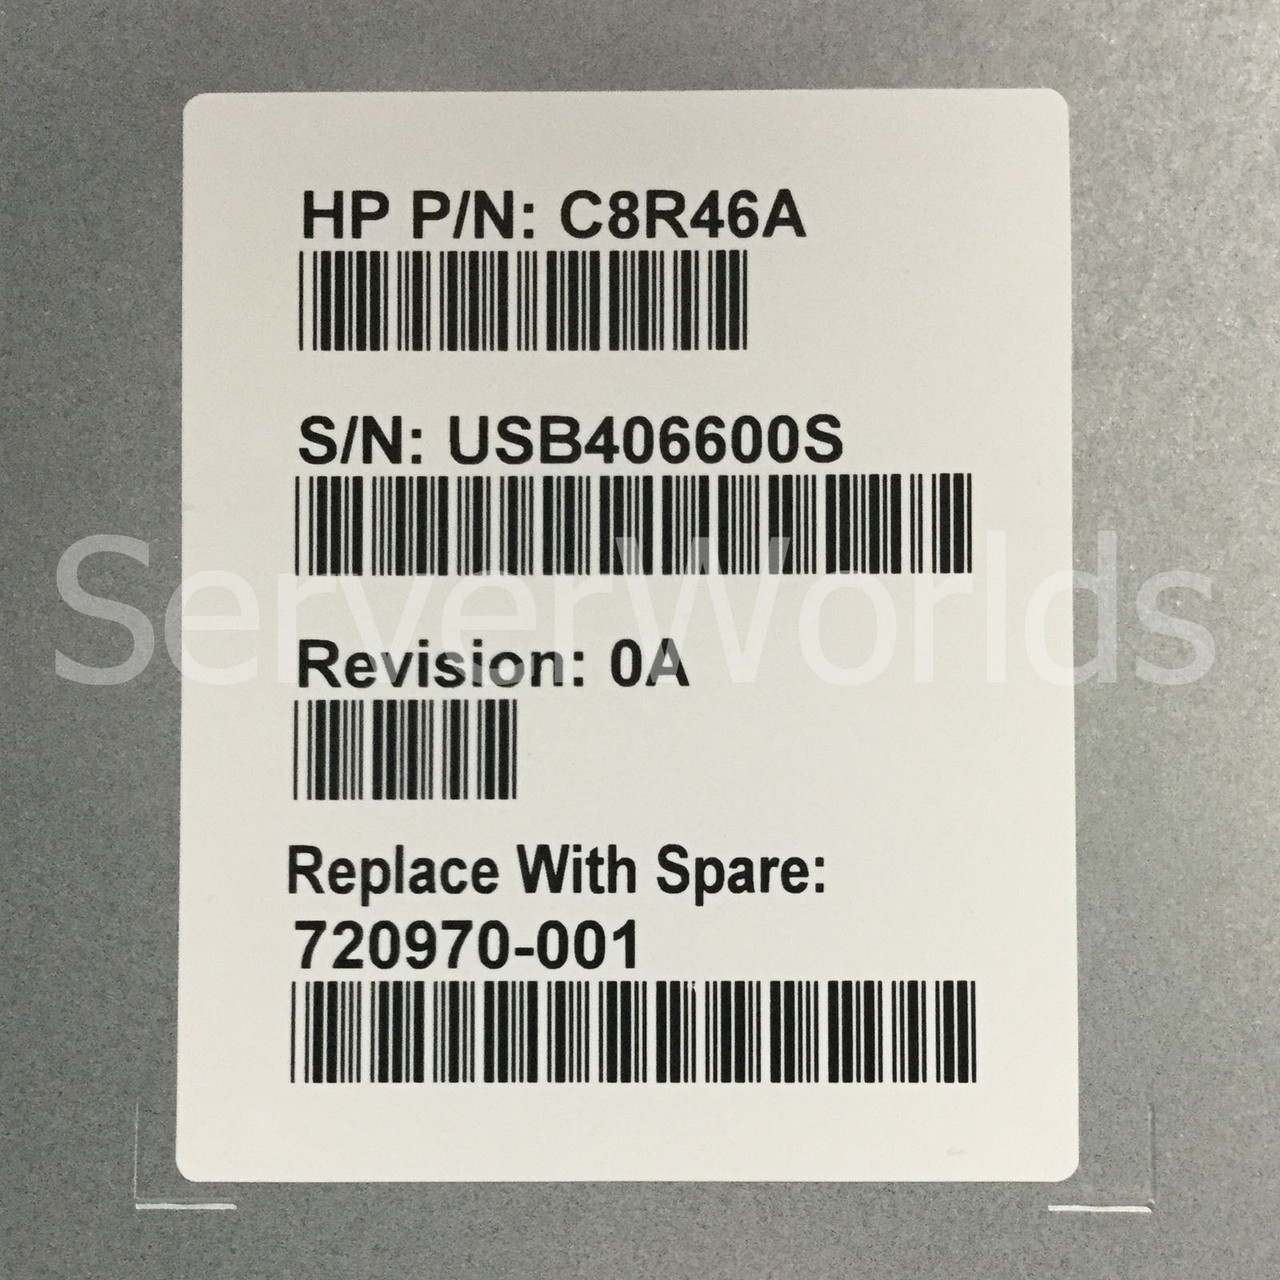 HP 720970-001 Storefabric Enhanced Multiprotocol Extension Blade C8R46A